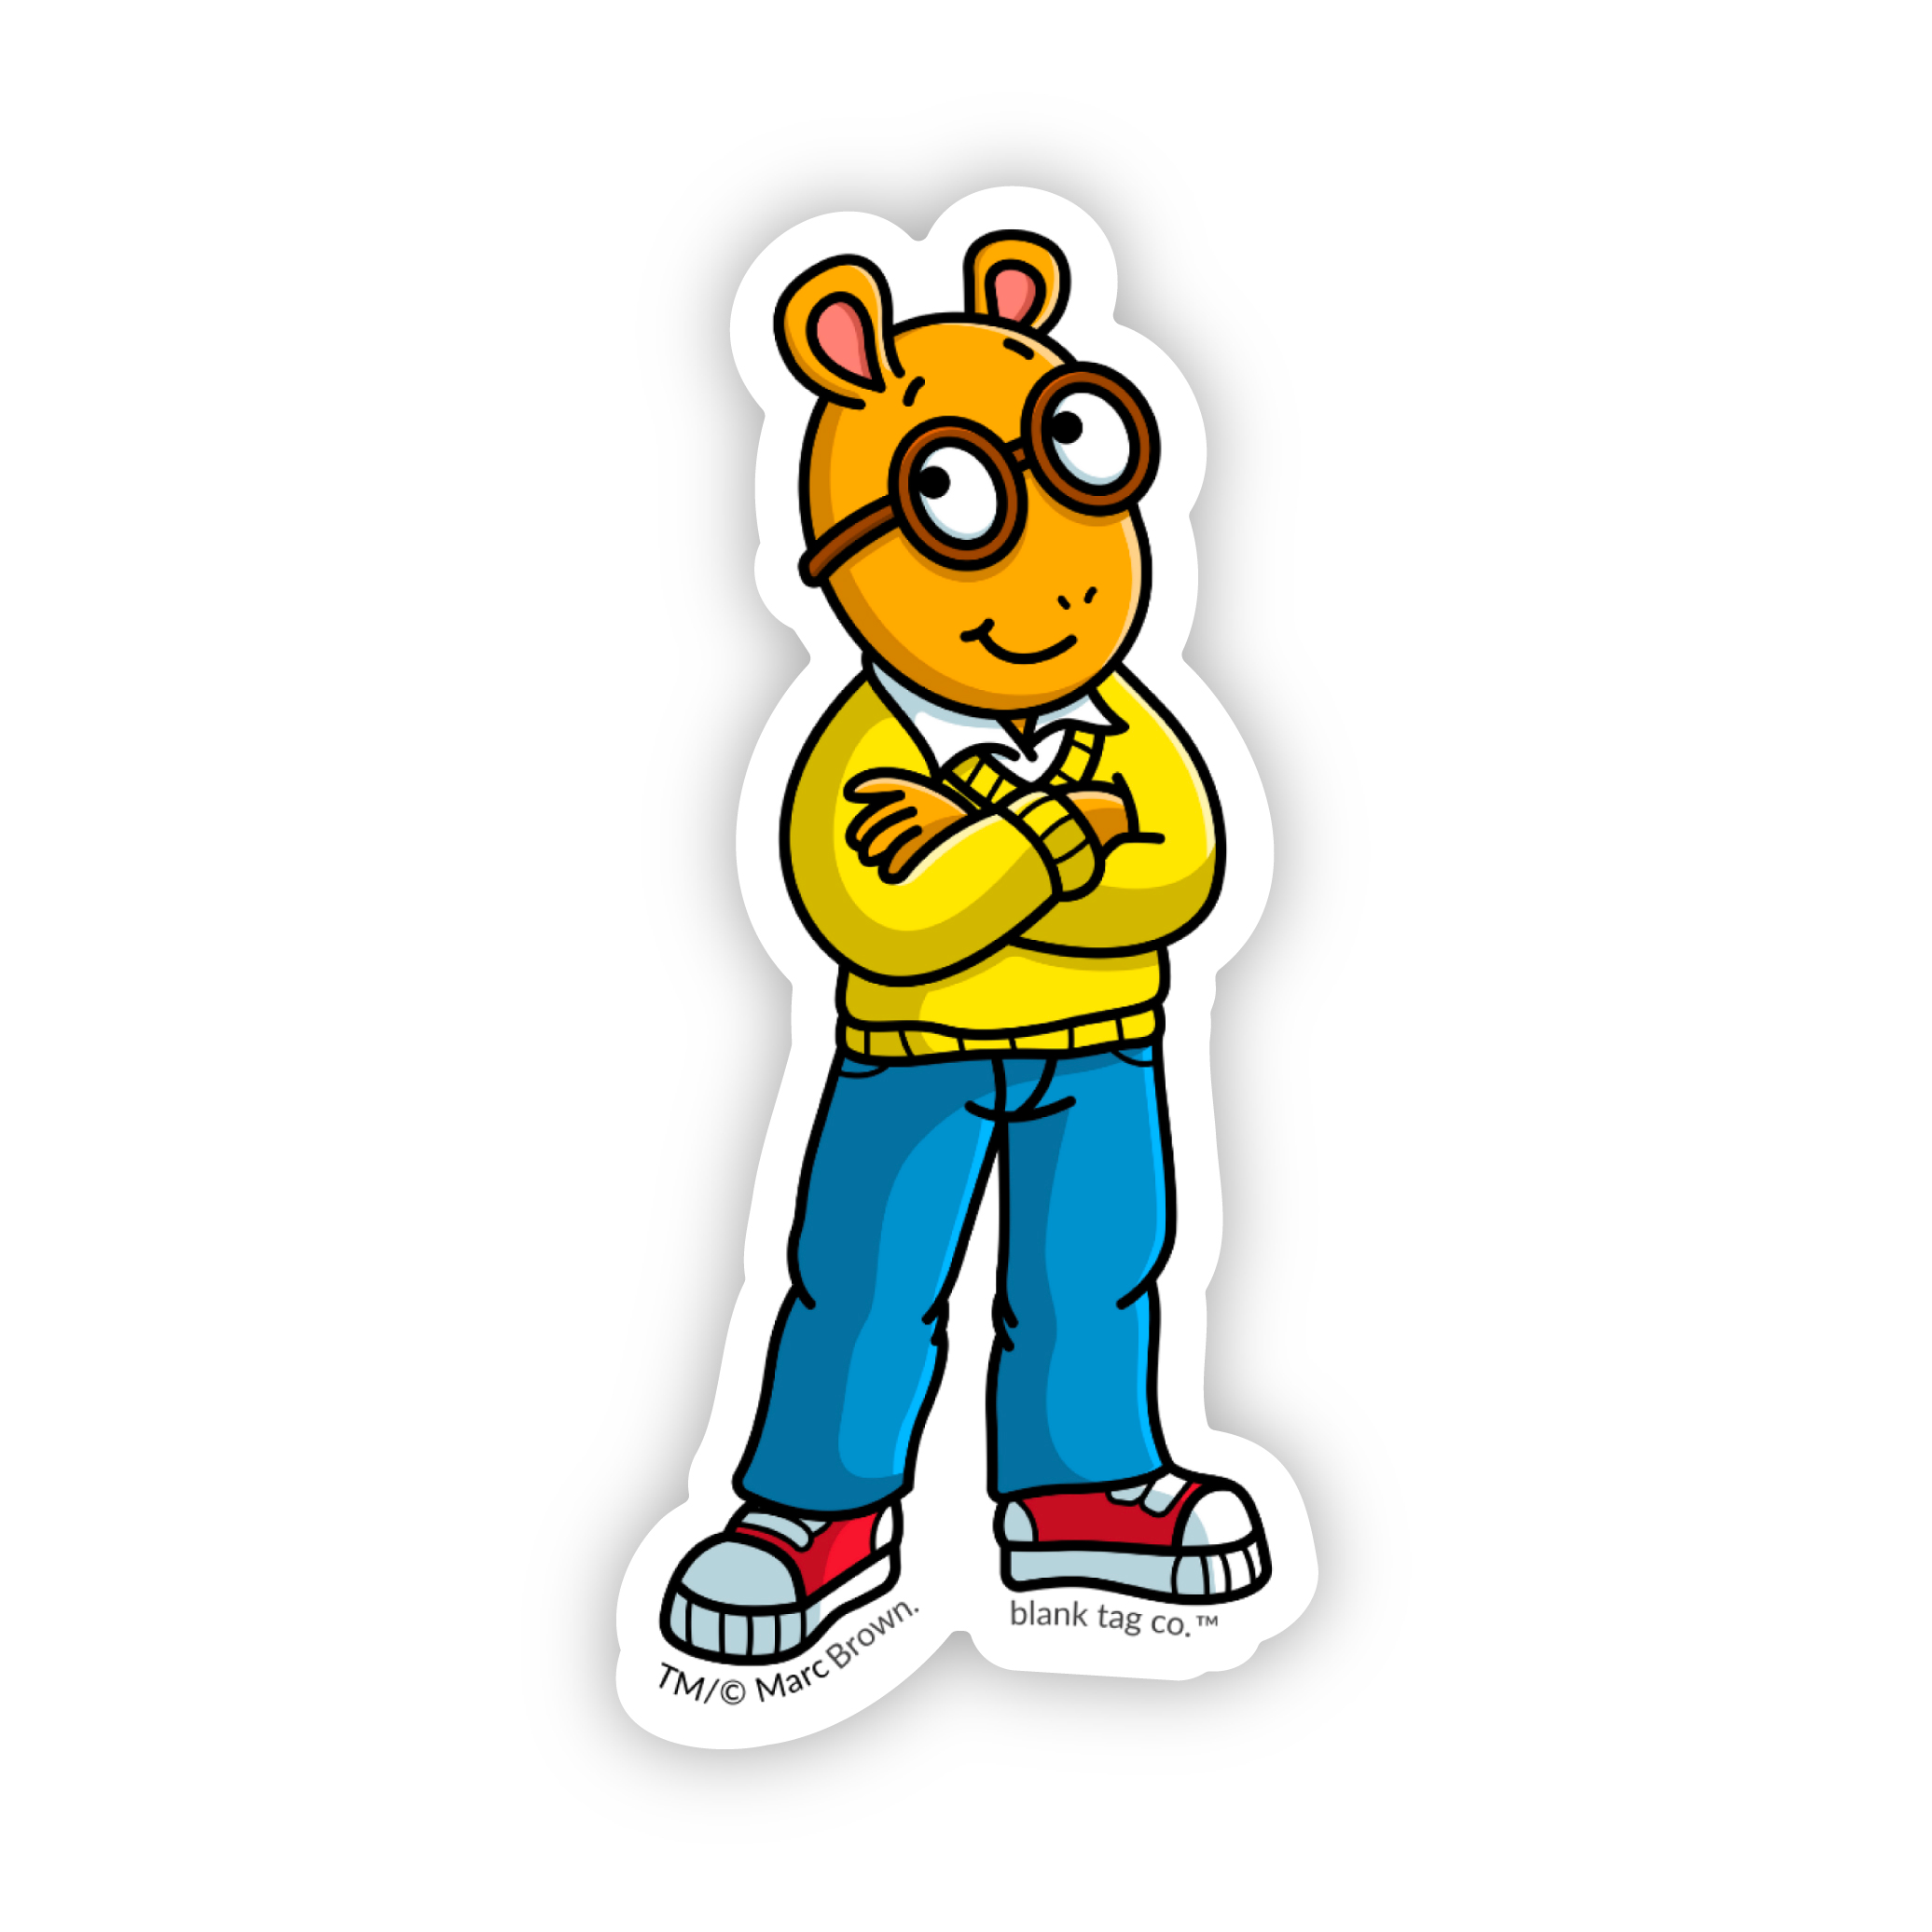 The Arthur Arms Crossed Sticker